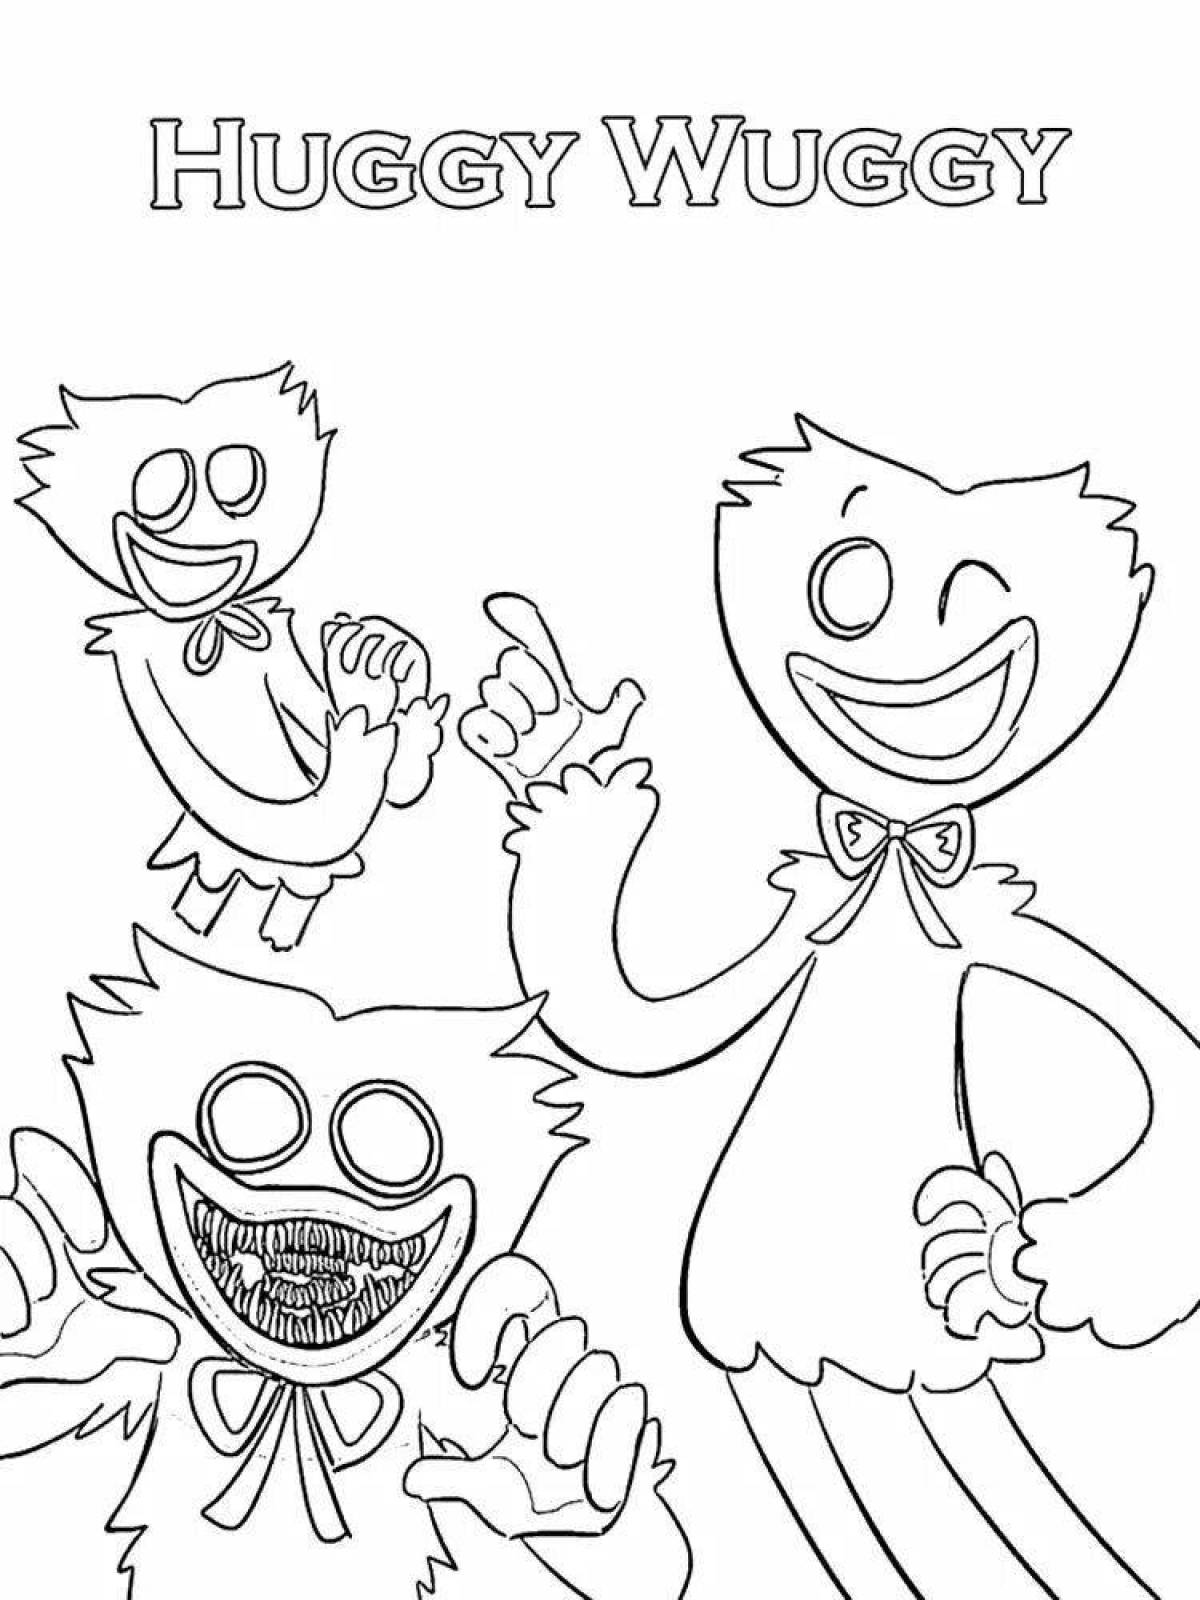 Ecstatic poppy playtime coloring page